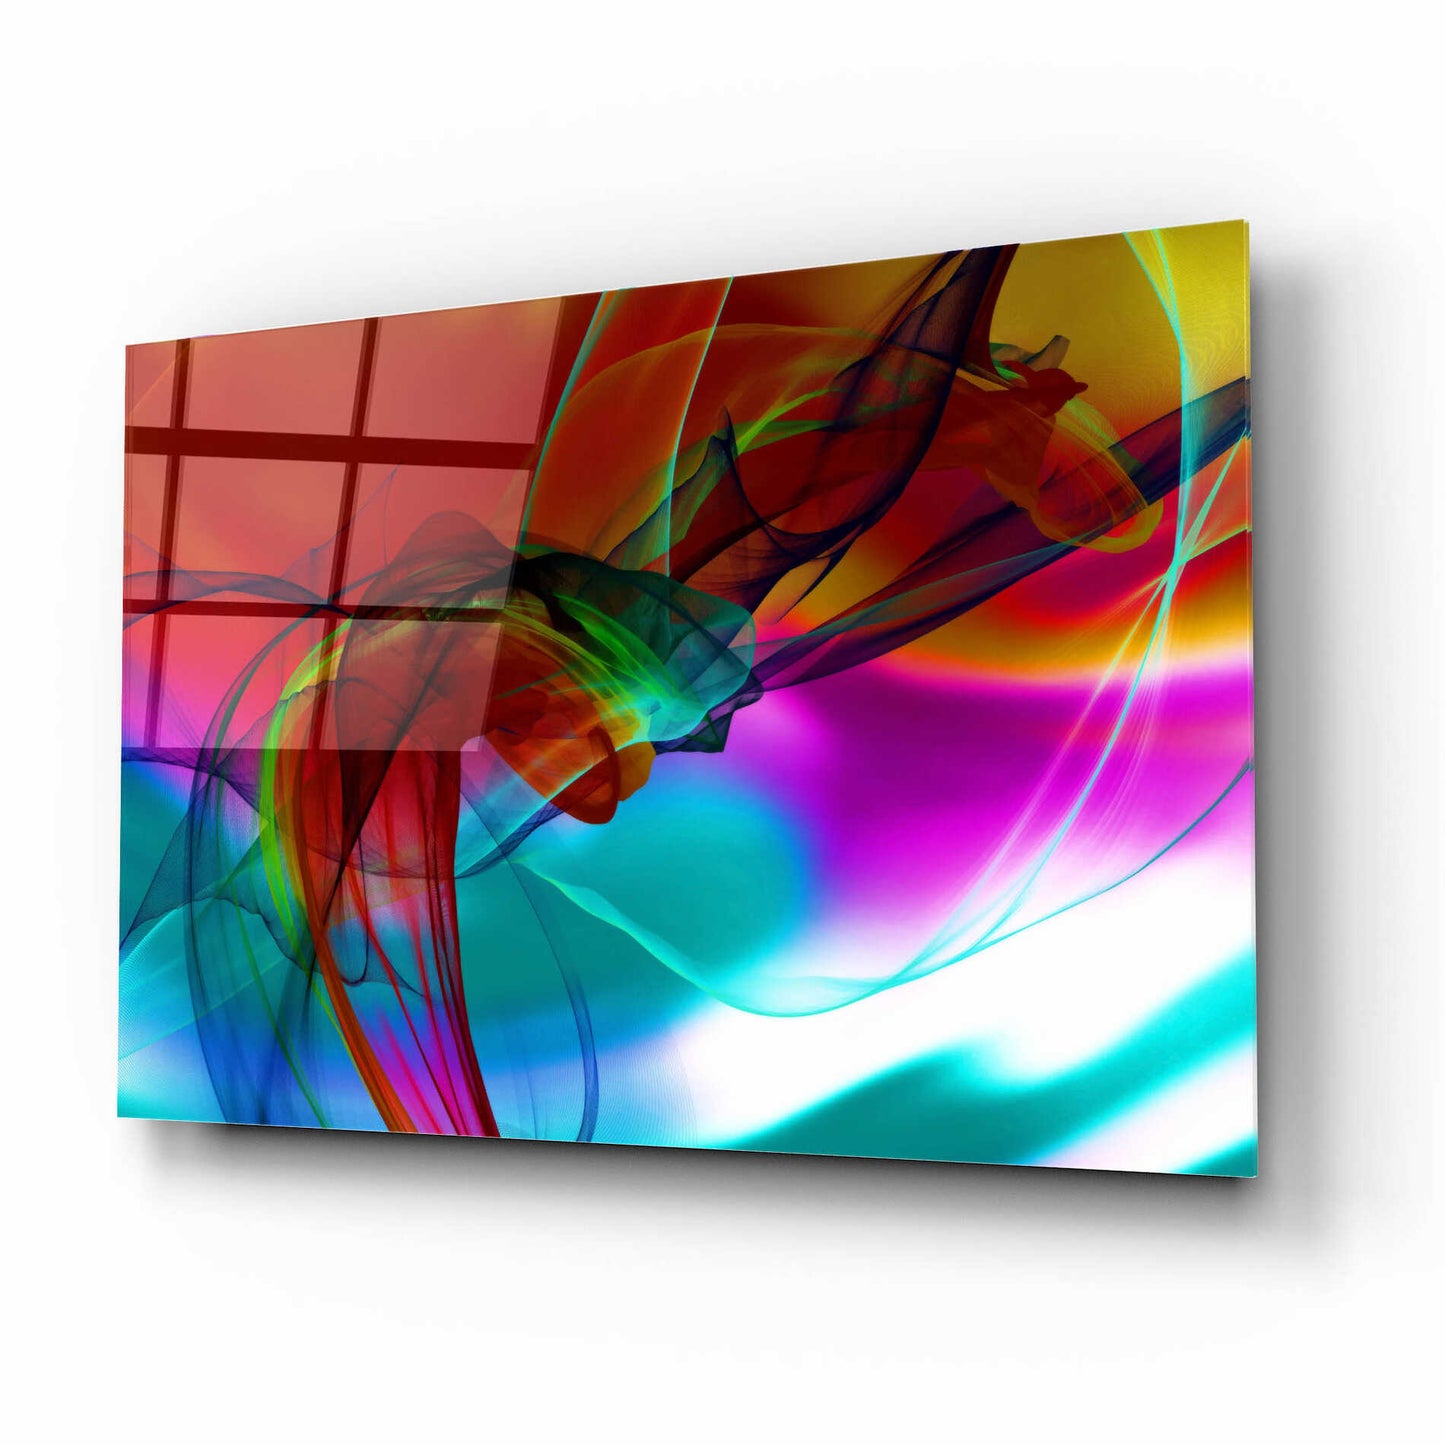 Epic Art 'Color In The Lines 16' by Irena Orlov, Acrylic Glass Wall Art,16x12